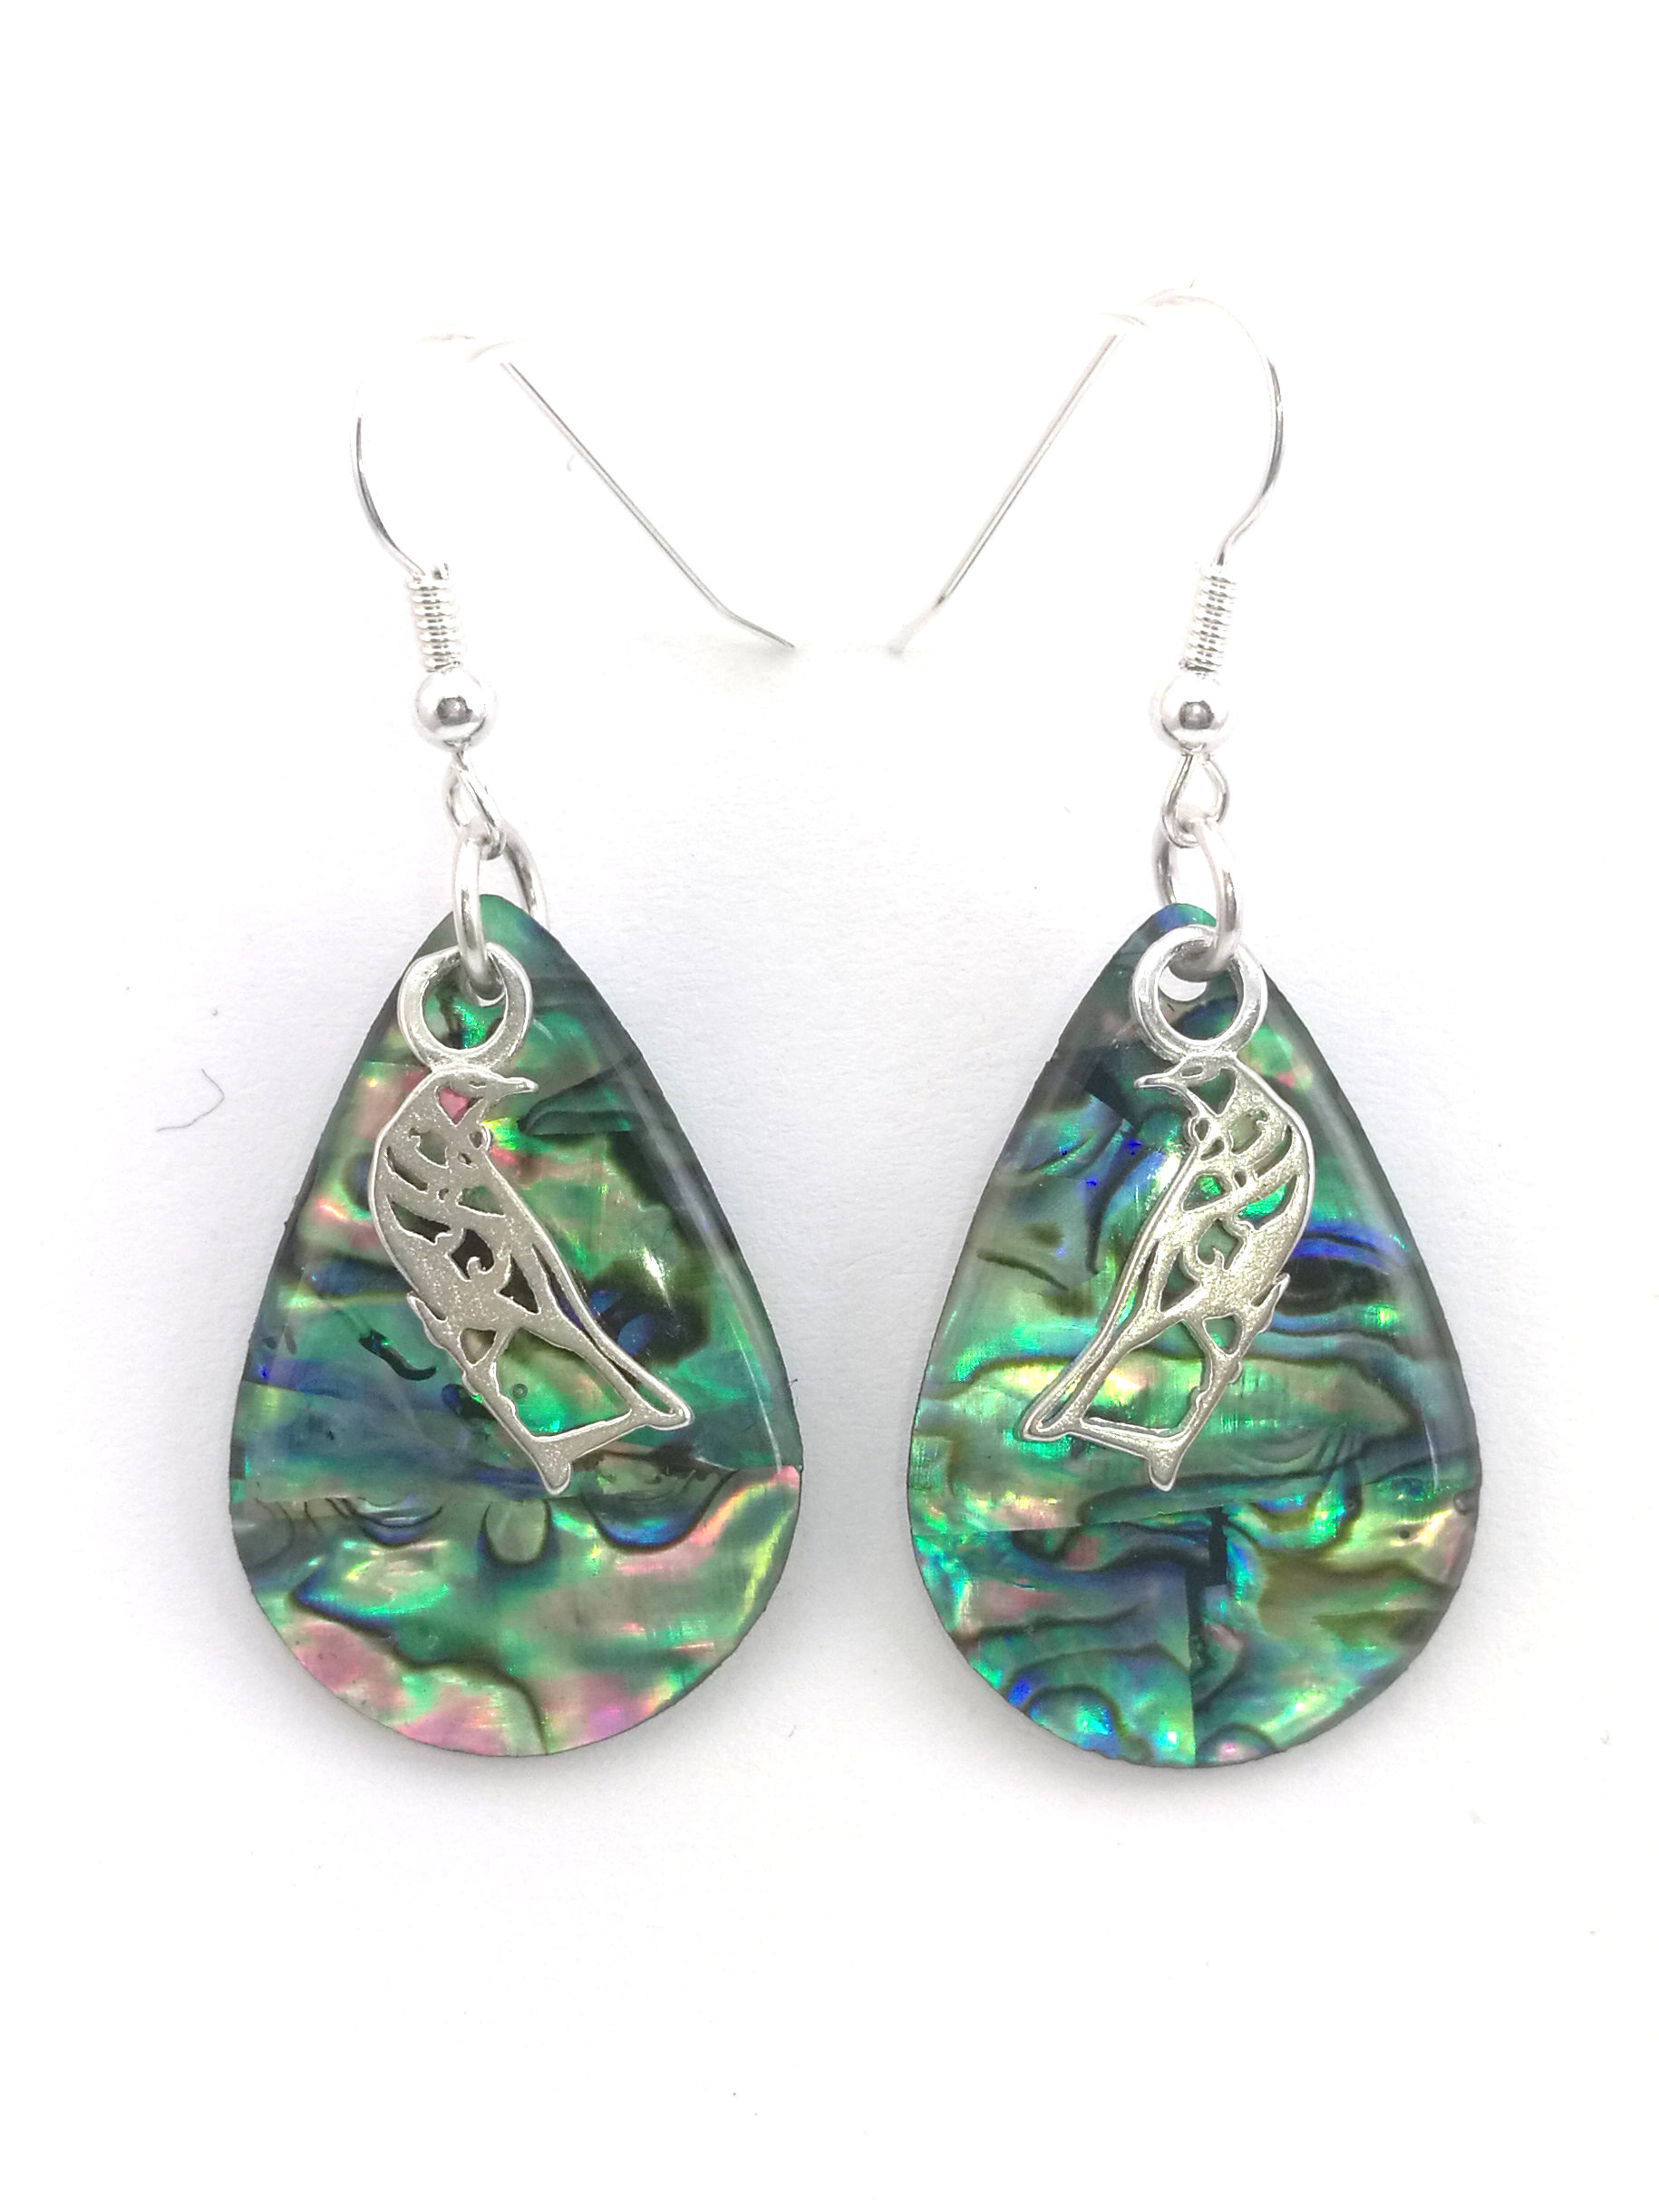 Paua earrings with Tui - Blue Penguin New Zealand Gifts